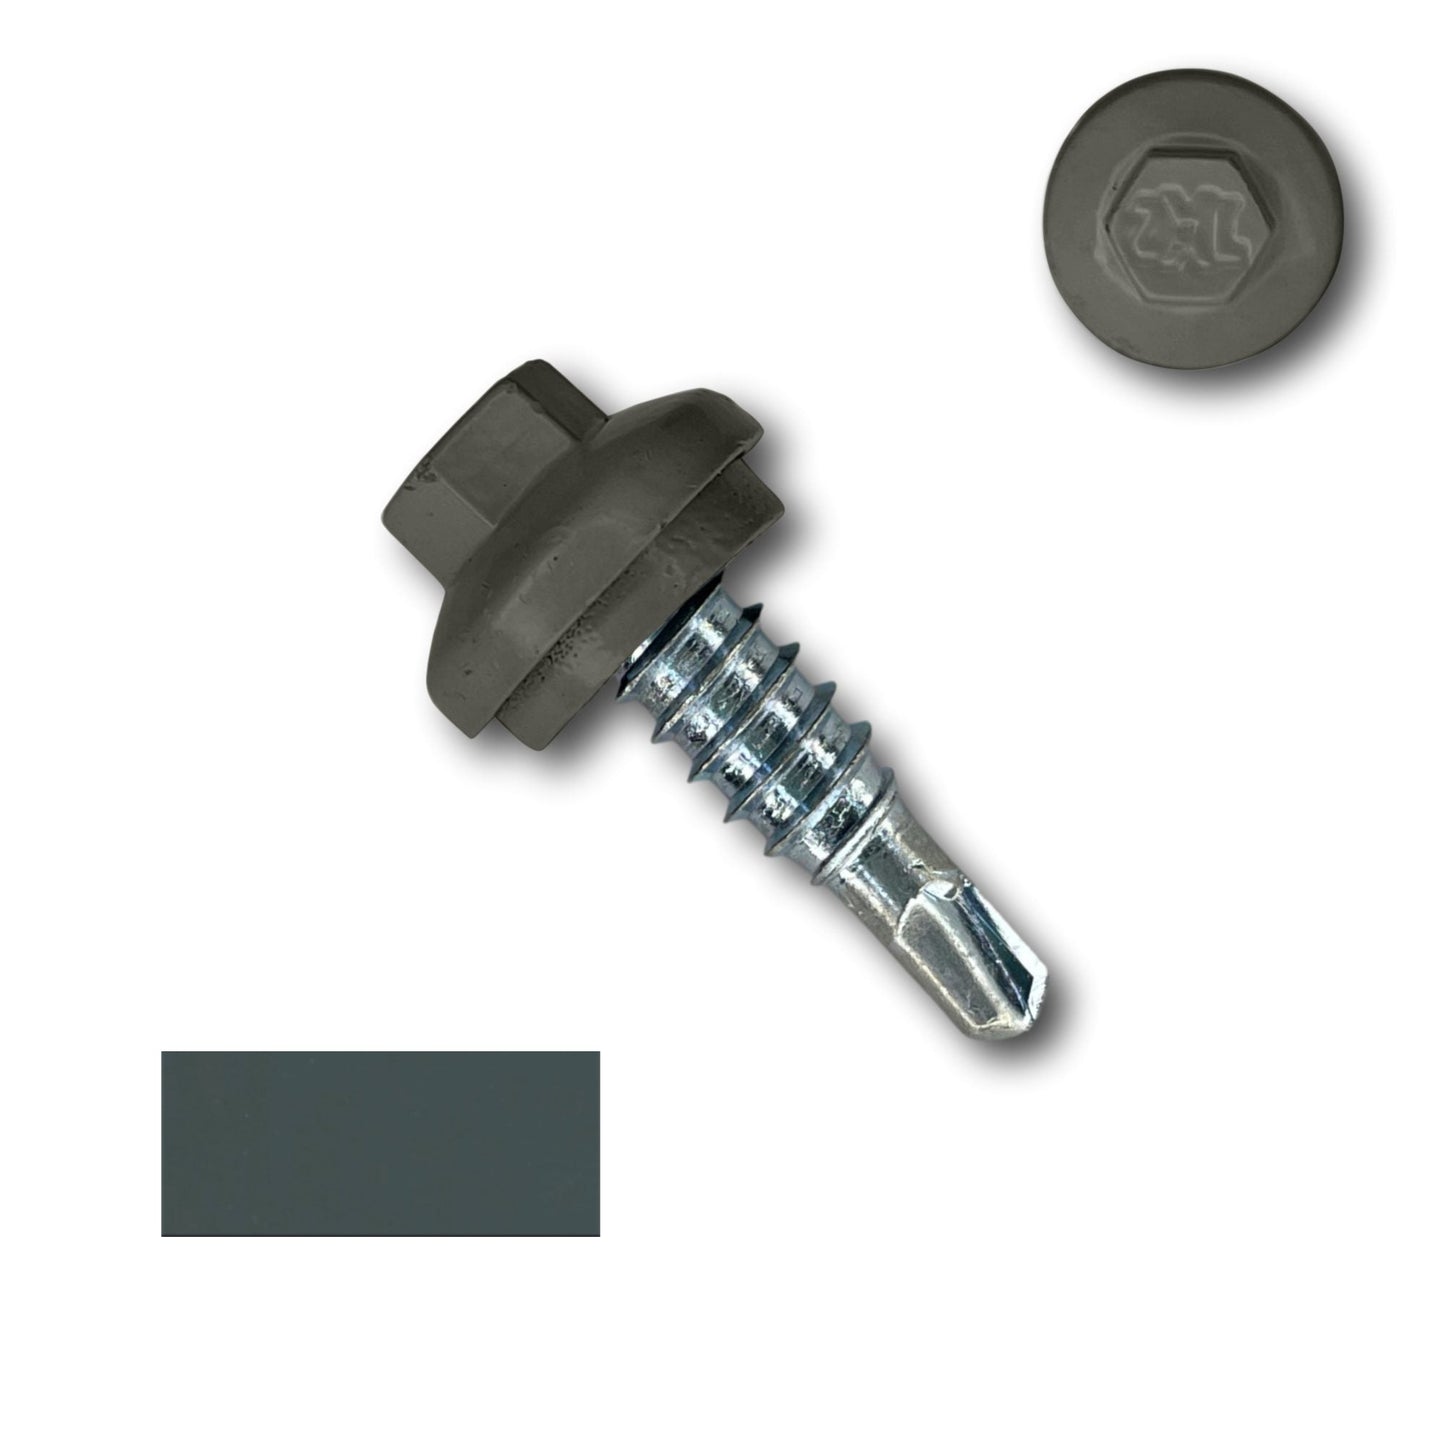 An image of a Perma Cover #14 x 7/8" Stitch Lap ZXL Dome Cap Metal Building Screws, Self-Drilling - 250 Pack with a hexagonal head and attached washer, designed for secure fastening, next to a matching gray ZXL Dome Cap Head. A rectangular sample of the gray color is also shown below the screw and cap.